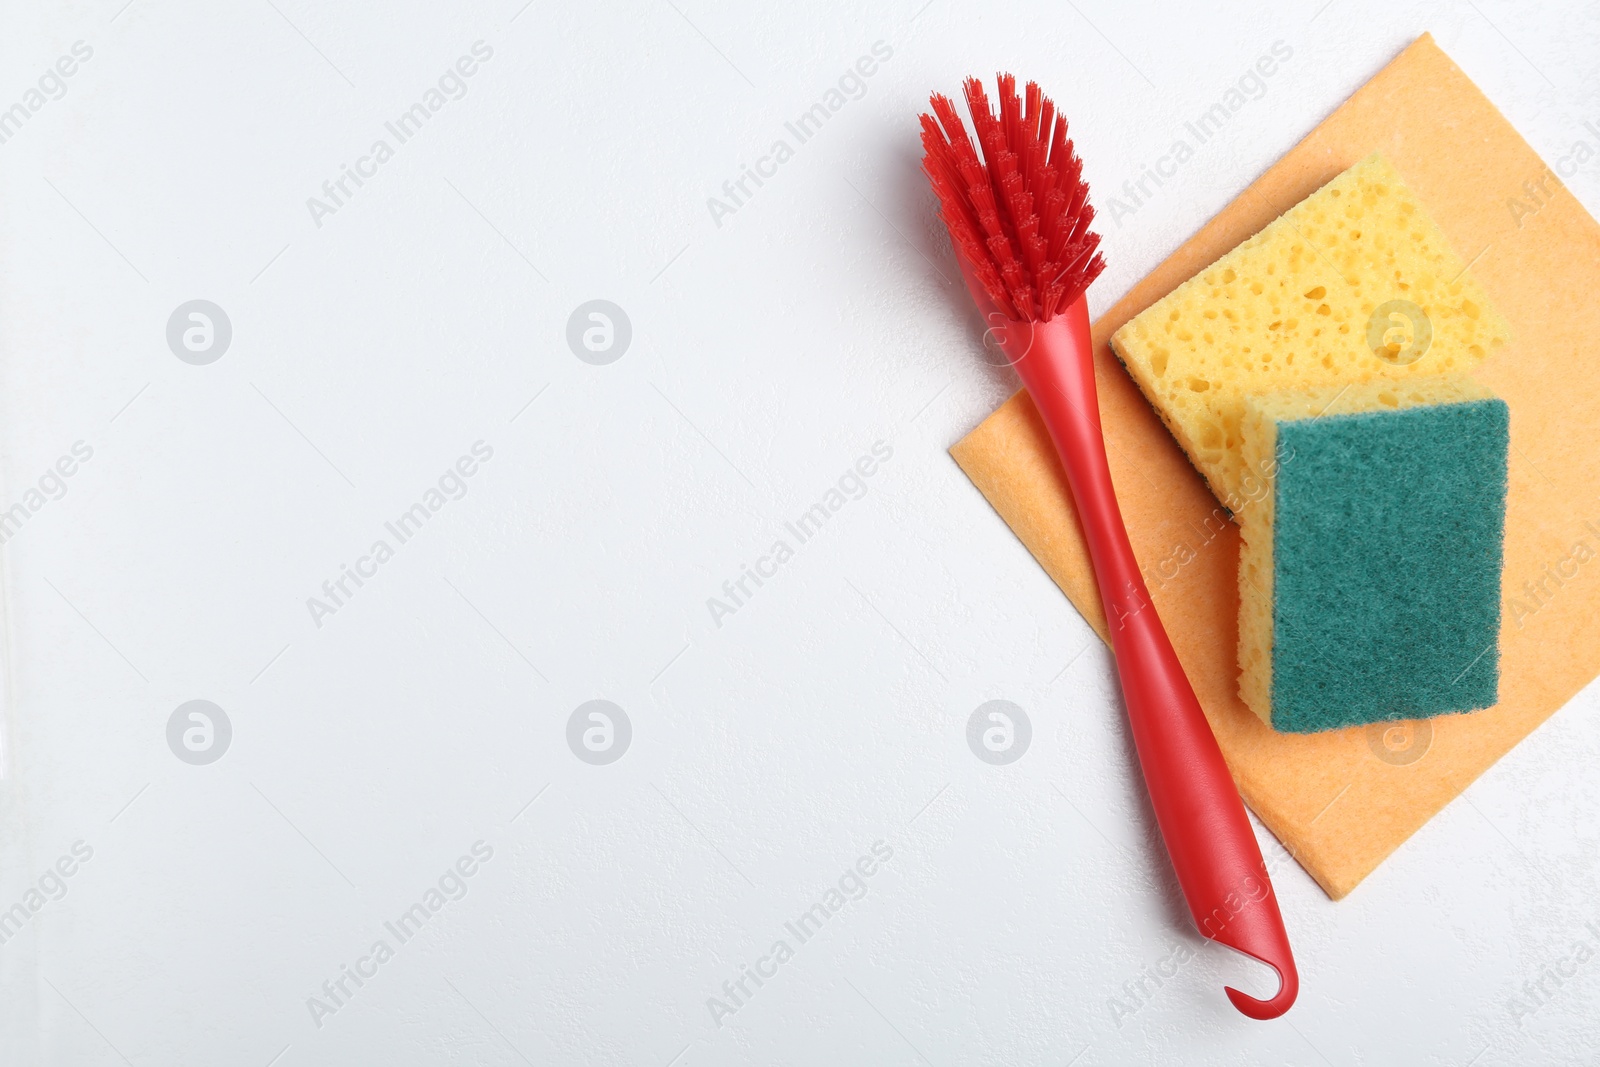 Photo of Cleaning brush, sponges and rag on white background, flat lay with space for text. Dish washing supplies